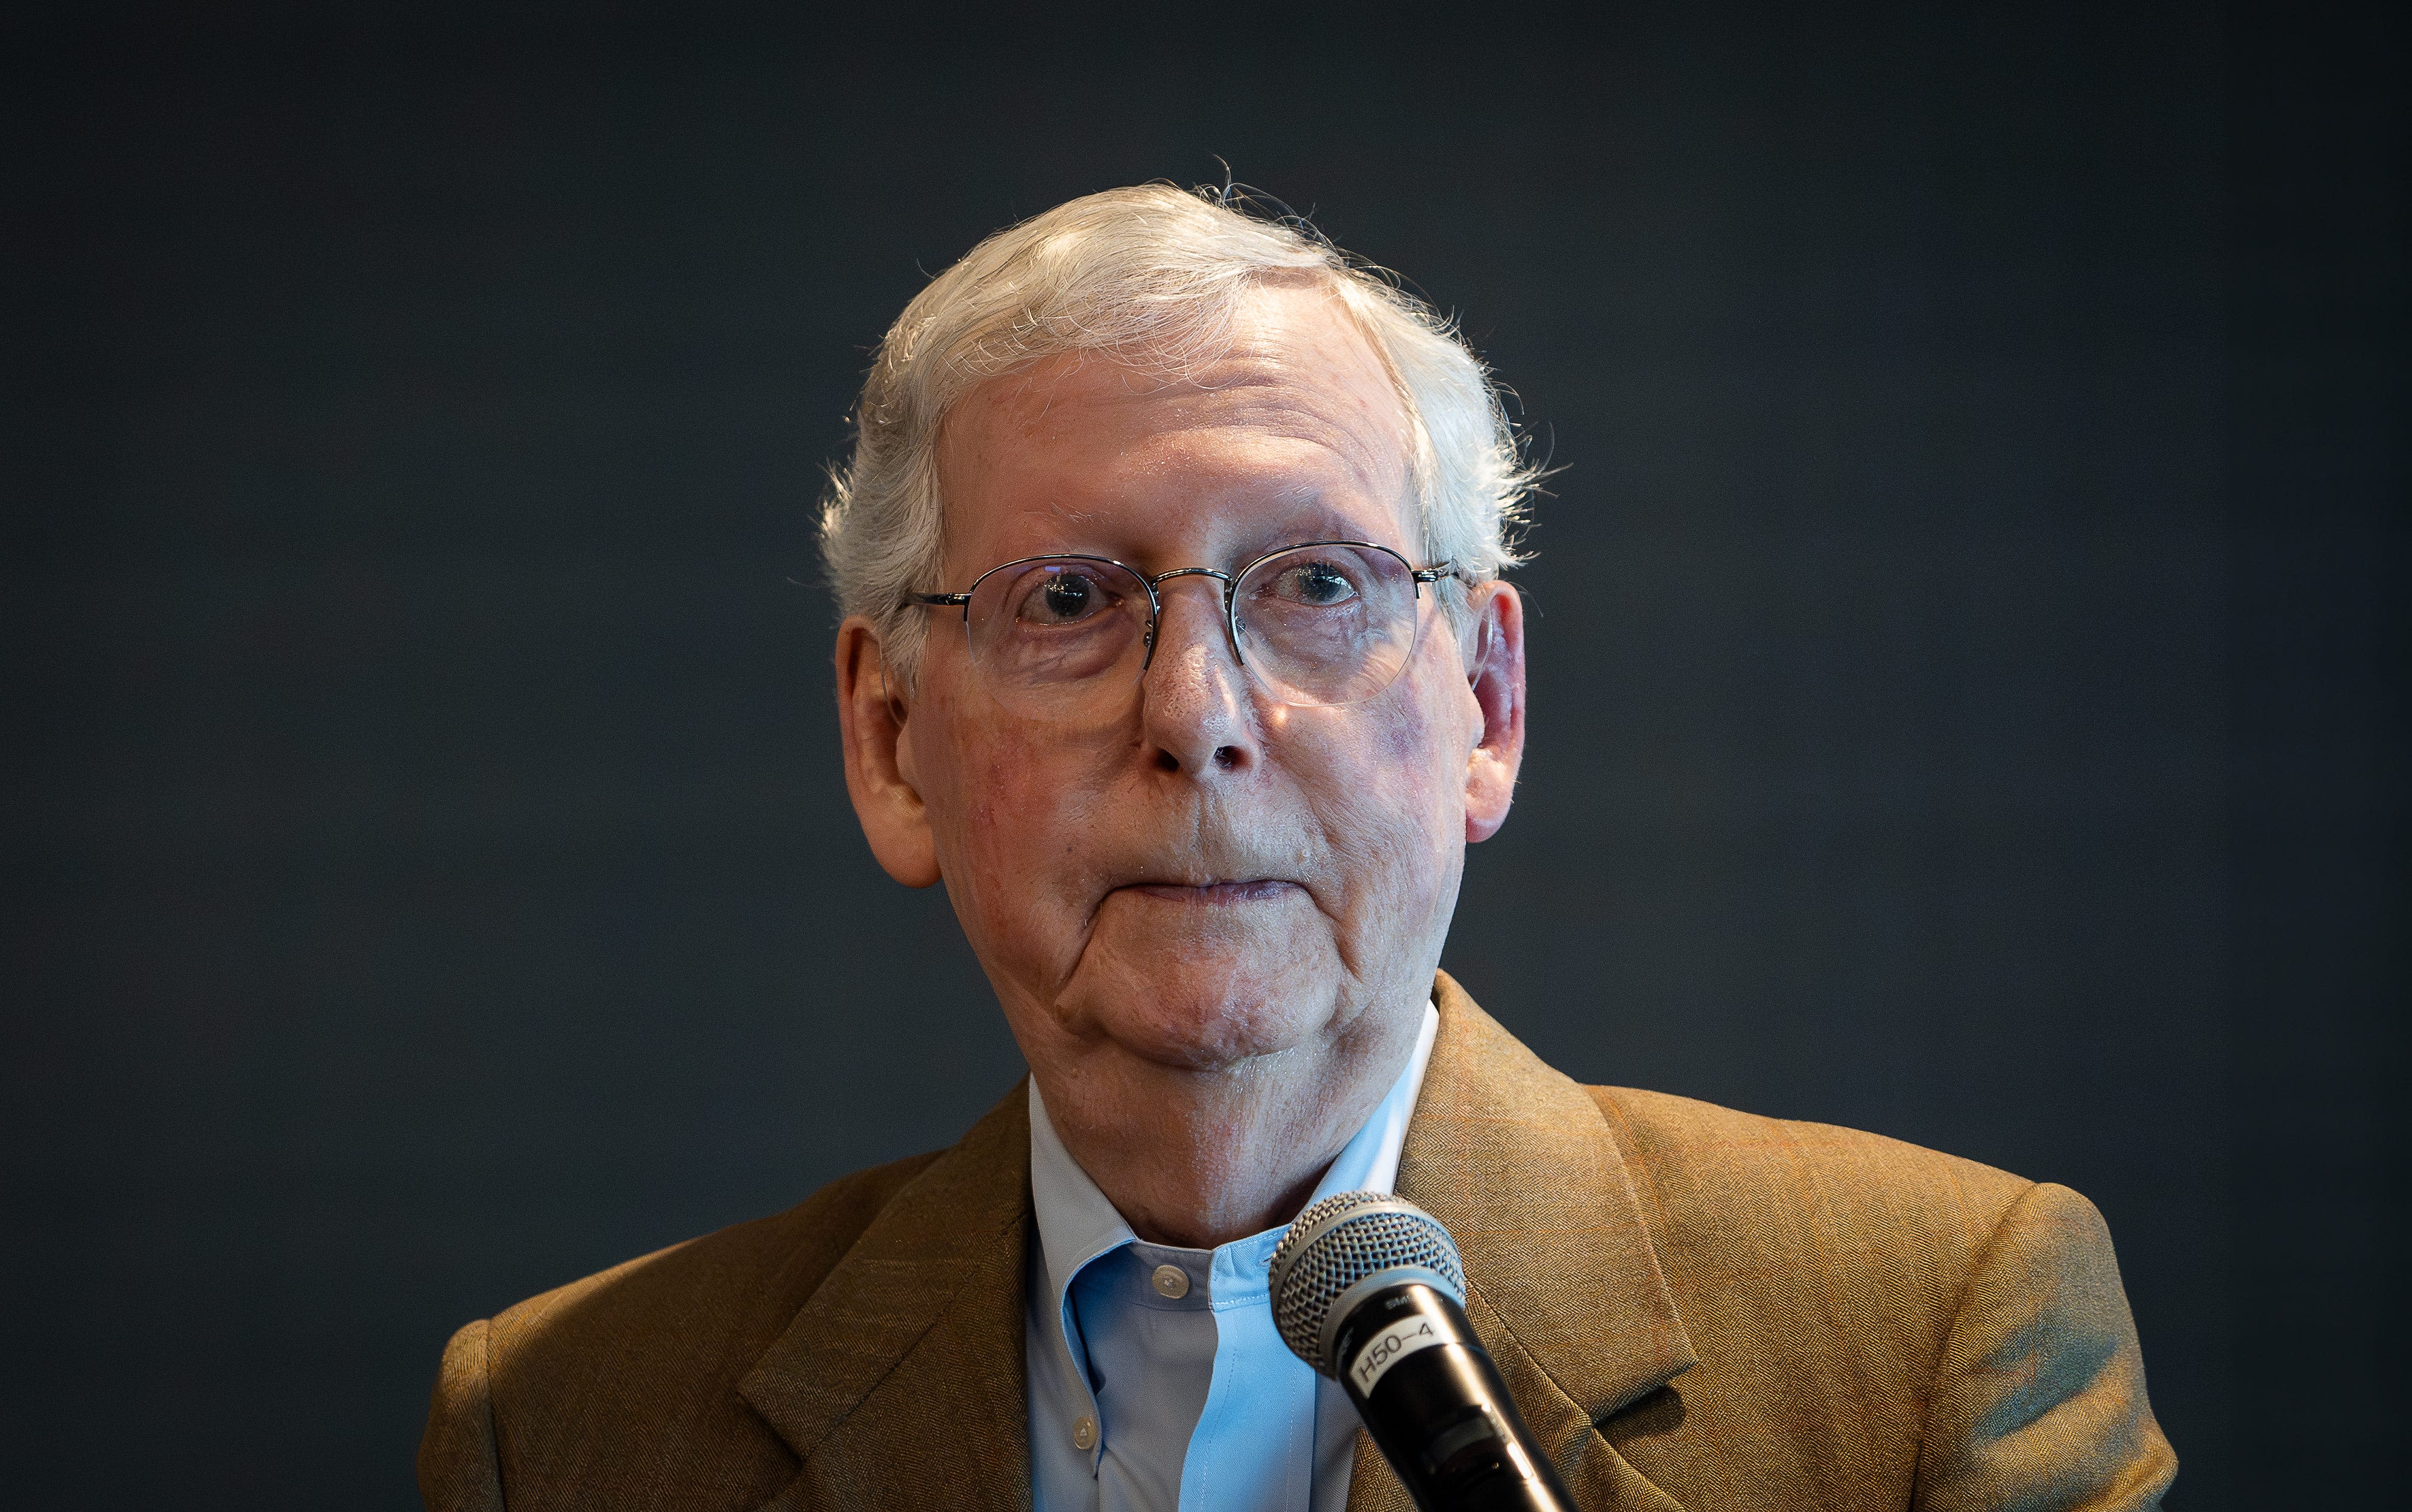 Gerth: Mitch McConnell's response to Biden withdrawal shows he's lost any grace he ever had